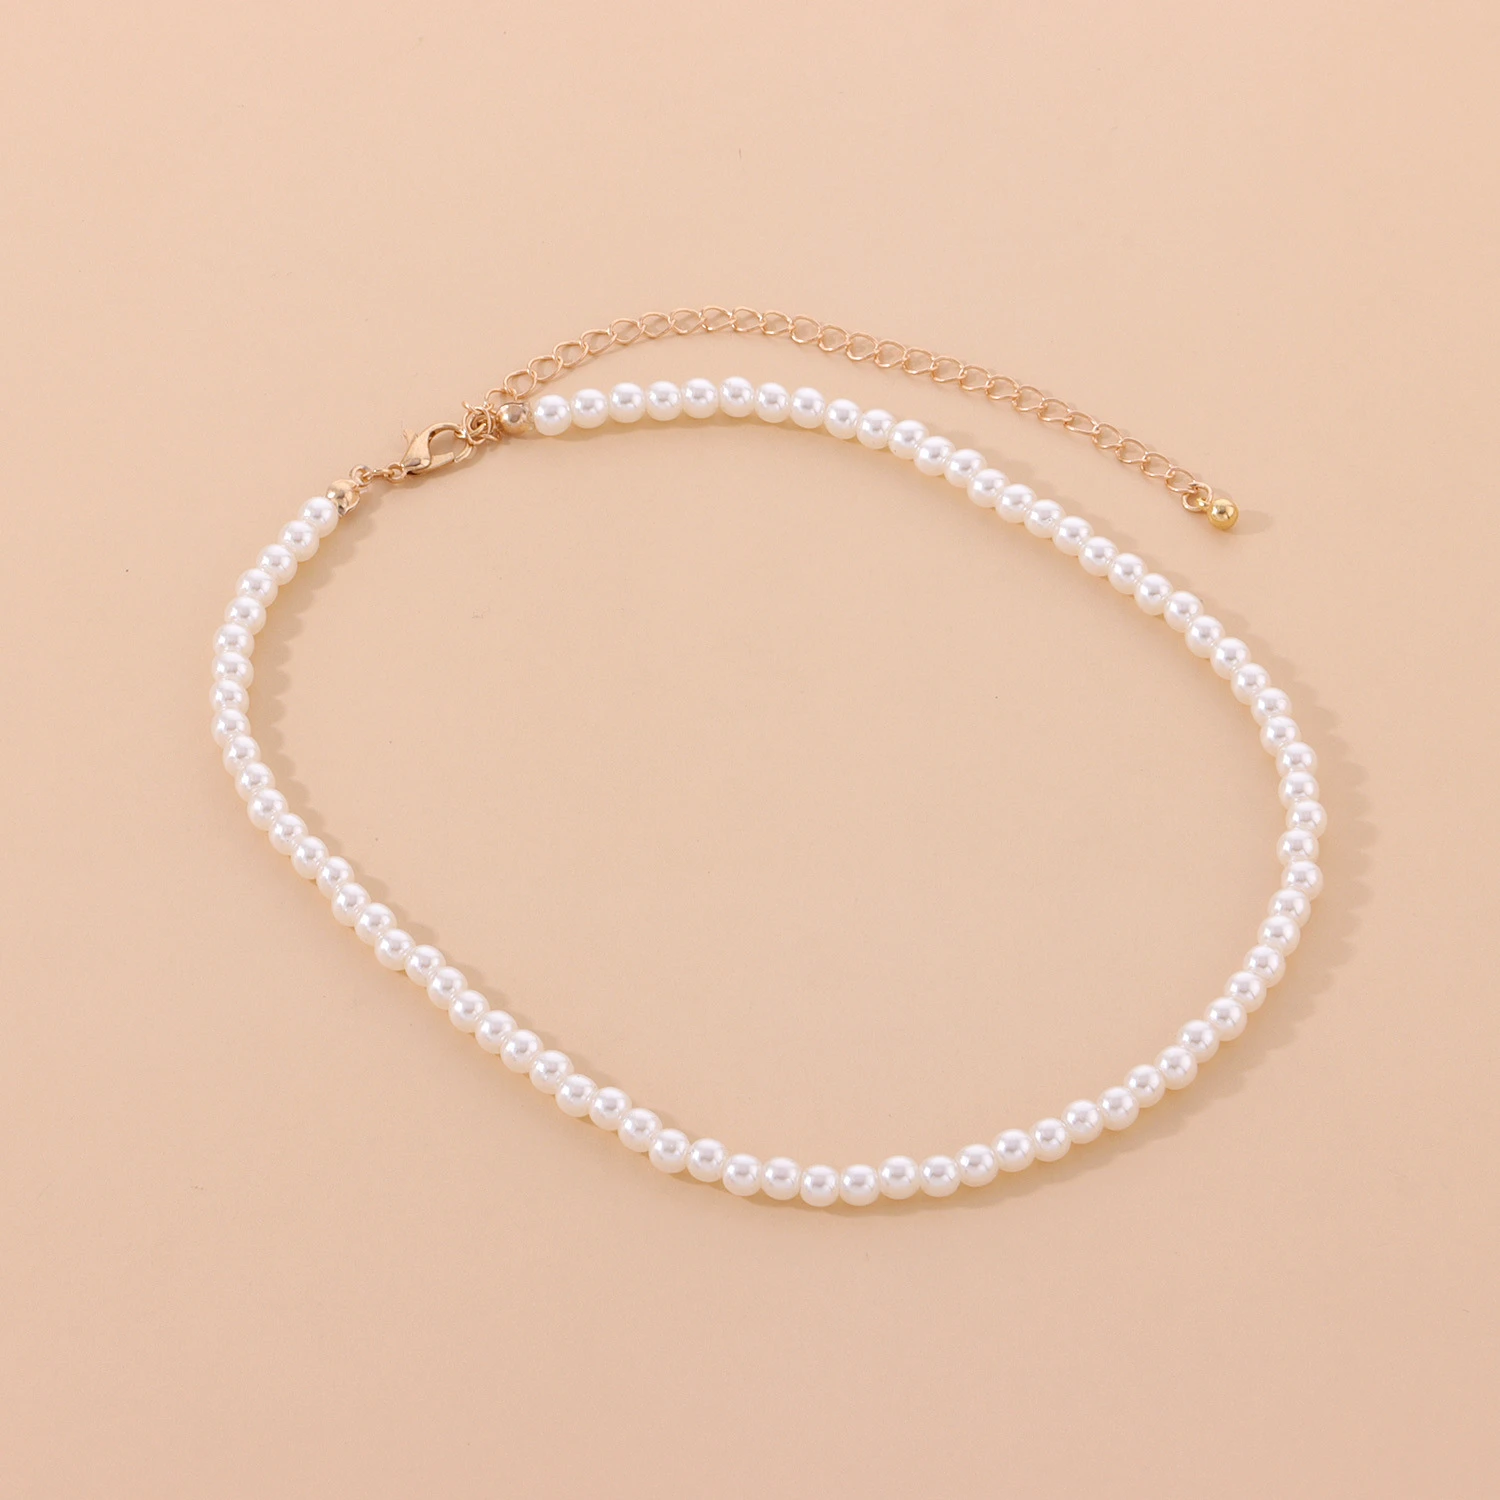 Dainty jewelry stainless steel gold plated box chain with tahiti freshwater pearl choker necklace